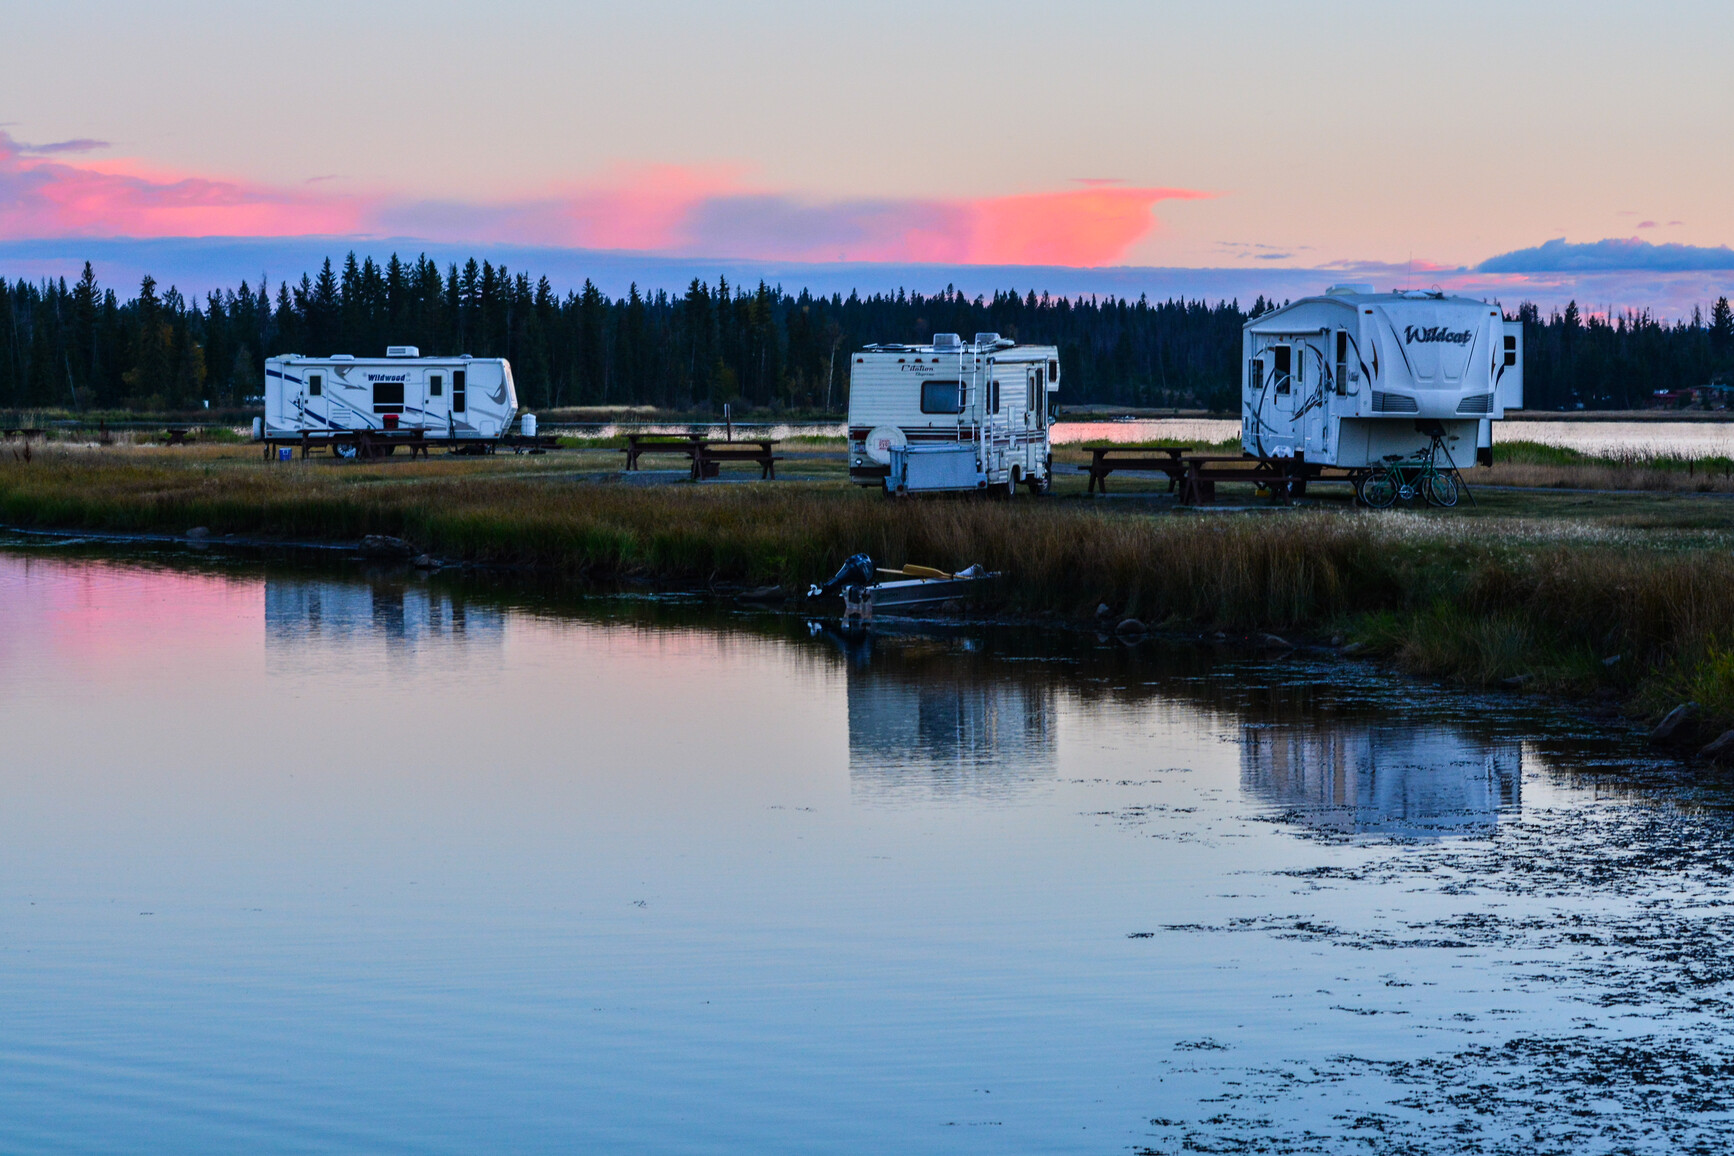 Tunkwa Lake - A view of the campground and lake at dusk. Trailers  are in the campground and there is a boat on the shoreline.